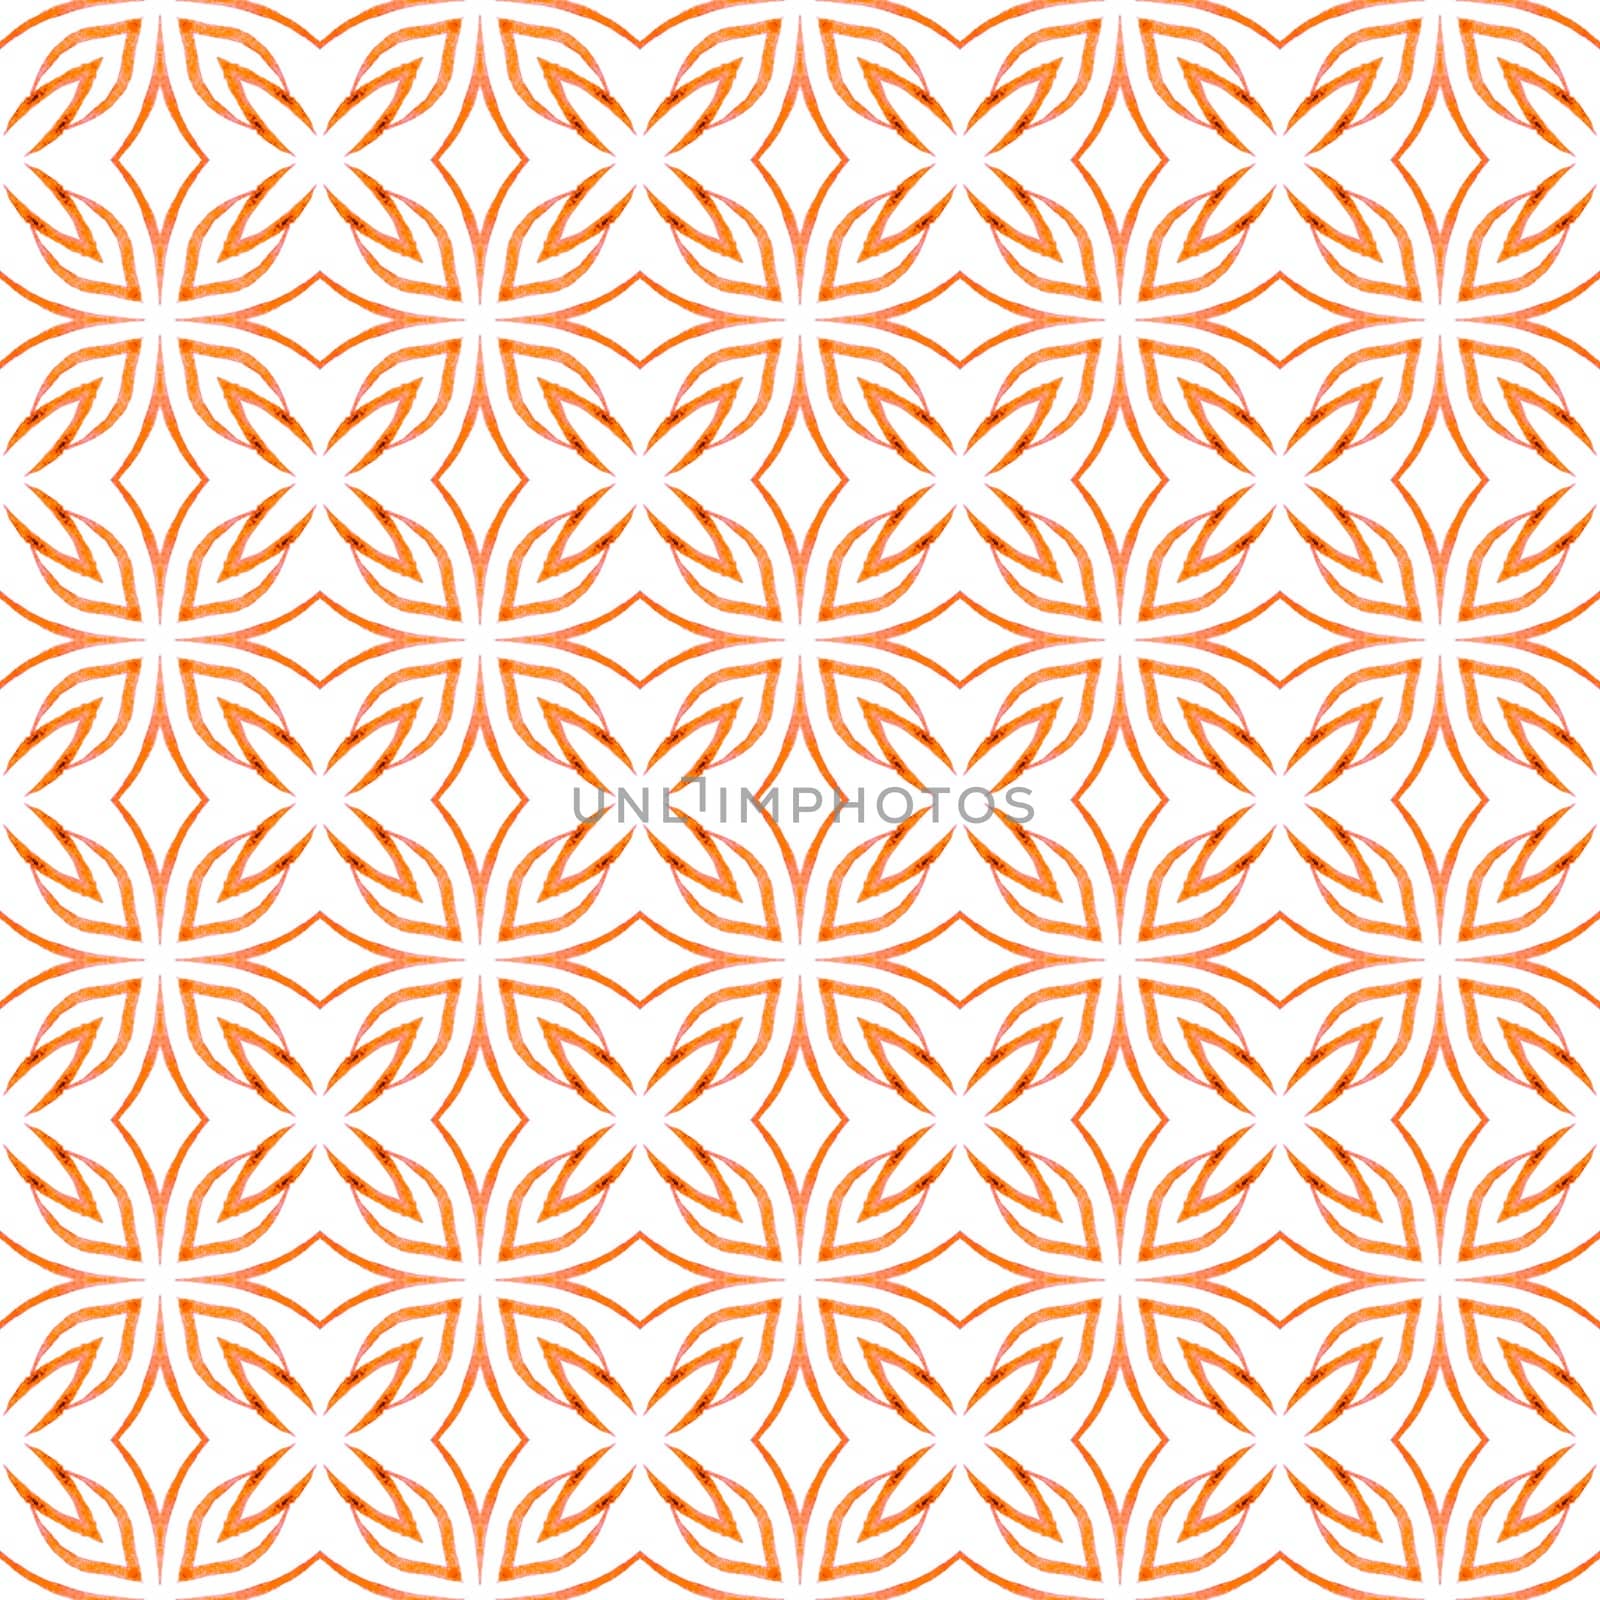 Textile ready beautiful print, swimwear fabric, wallpaper, wrapping. Orange marvelous boho chic summer design. Hand painted tiled watercolor border. Tiled watercolor background.